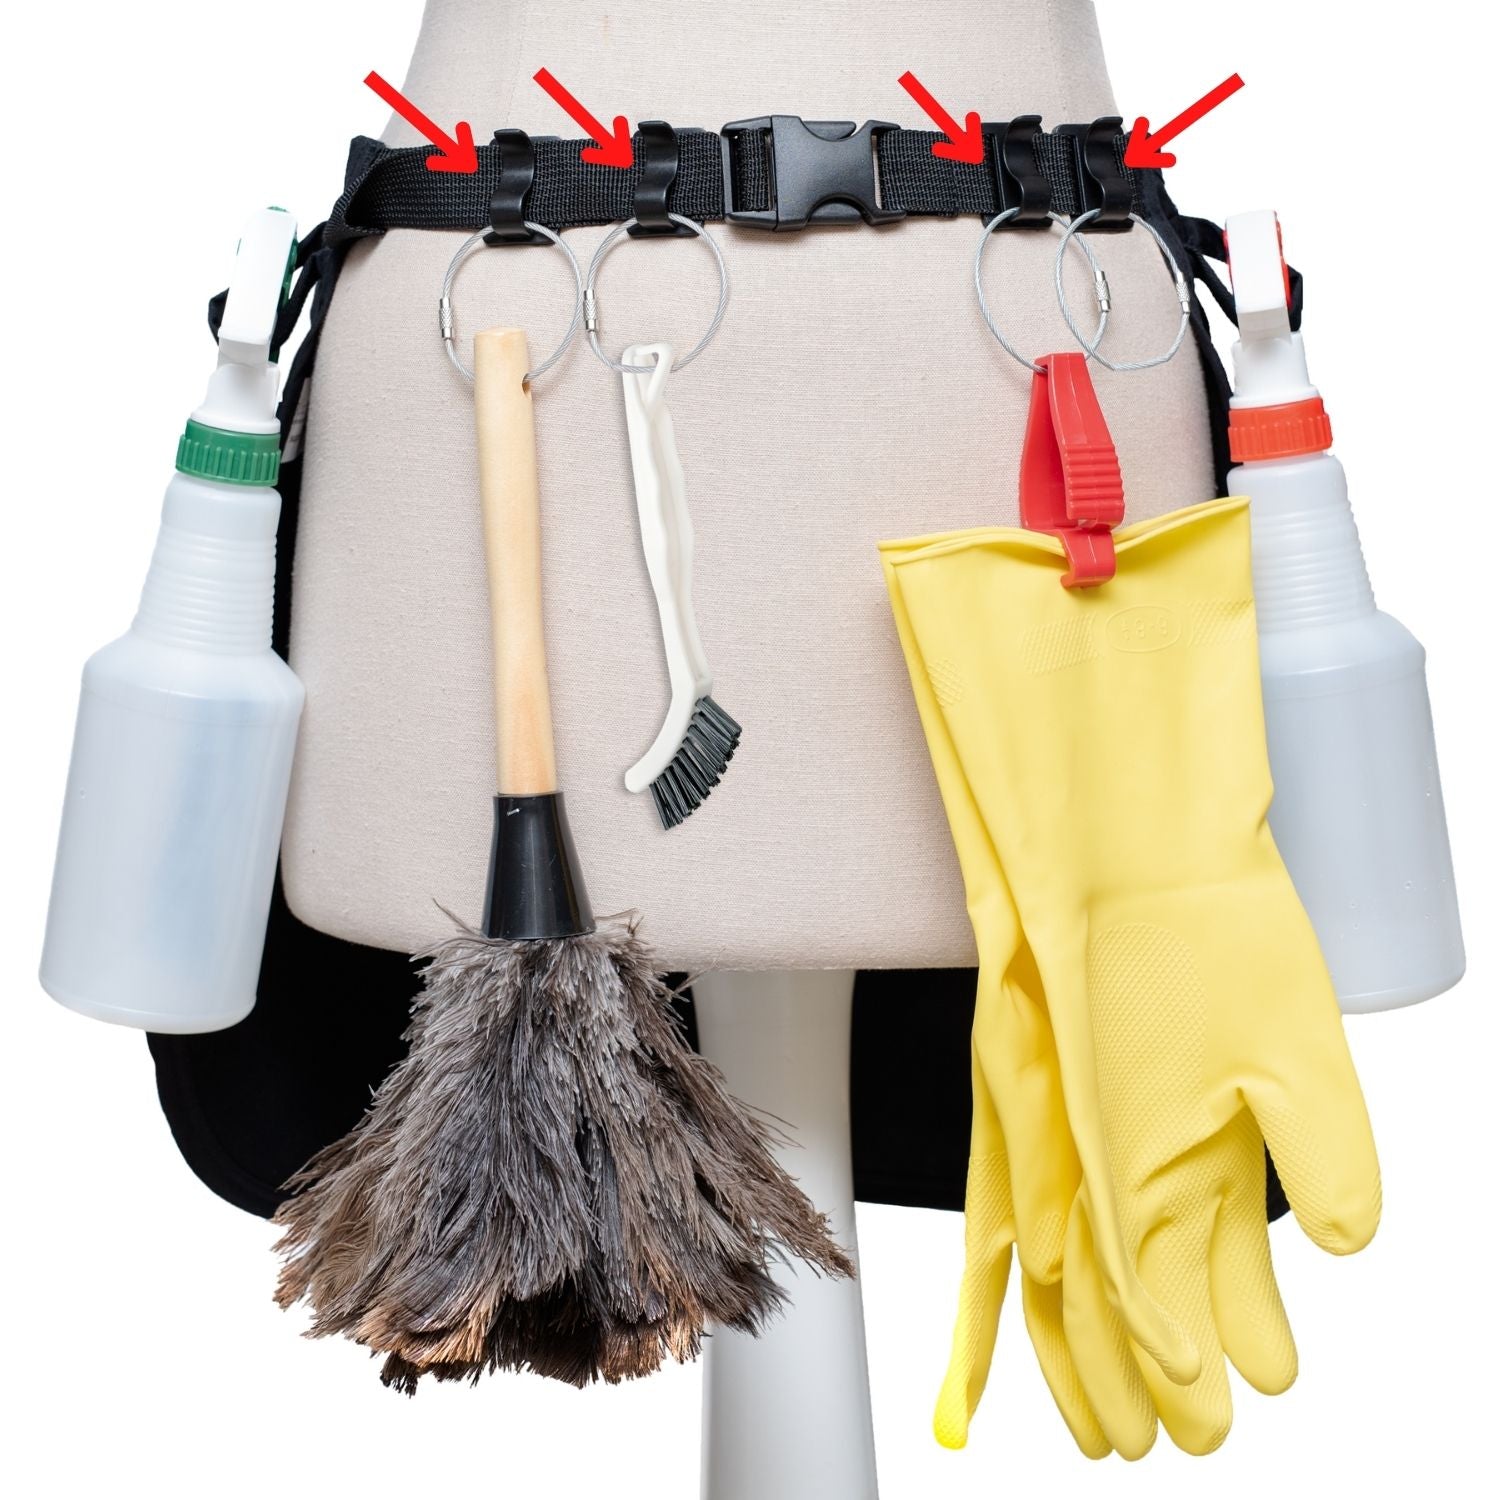 Speed Cleaning Tools for Maid Services